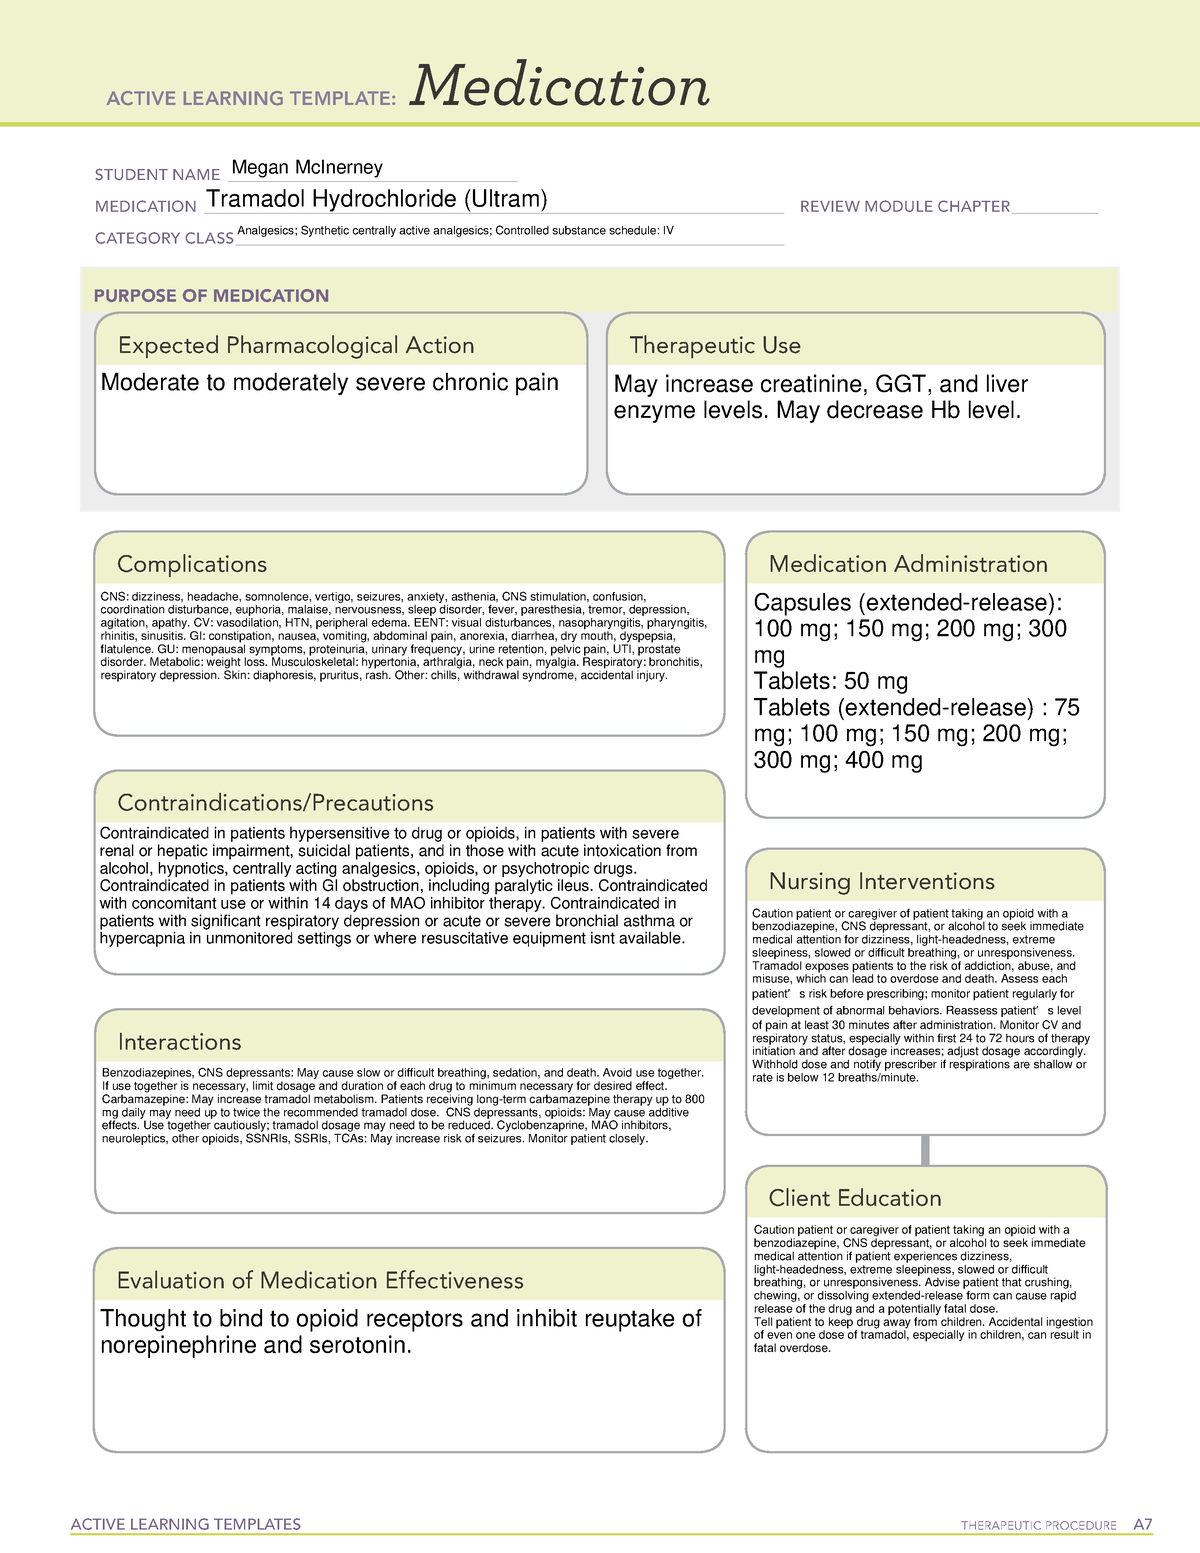 tramadol-medication-card-wk-2-active-learning-templates-therapeutic-procedure-a-medication